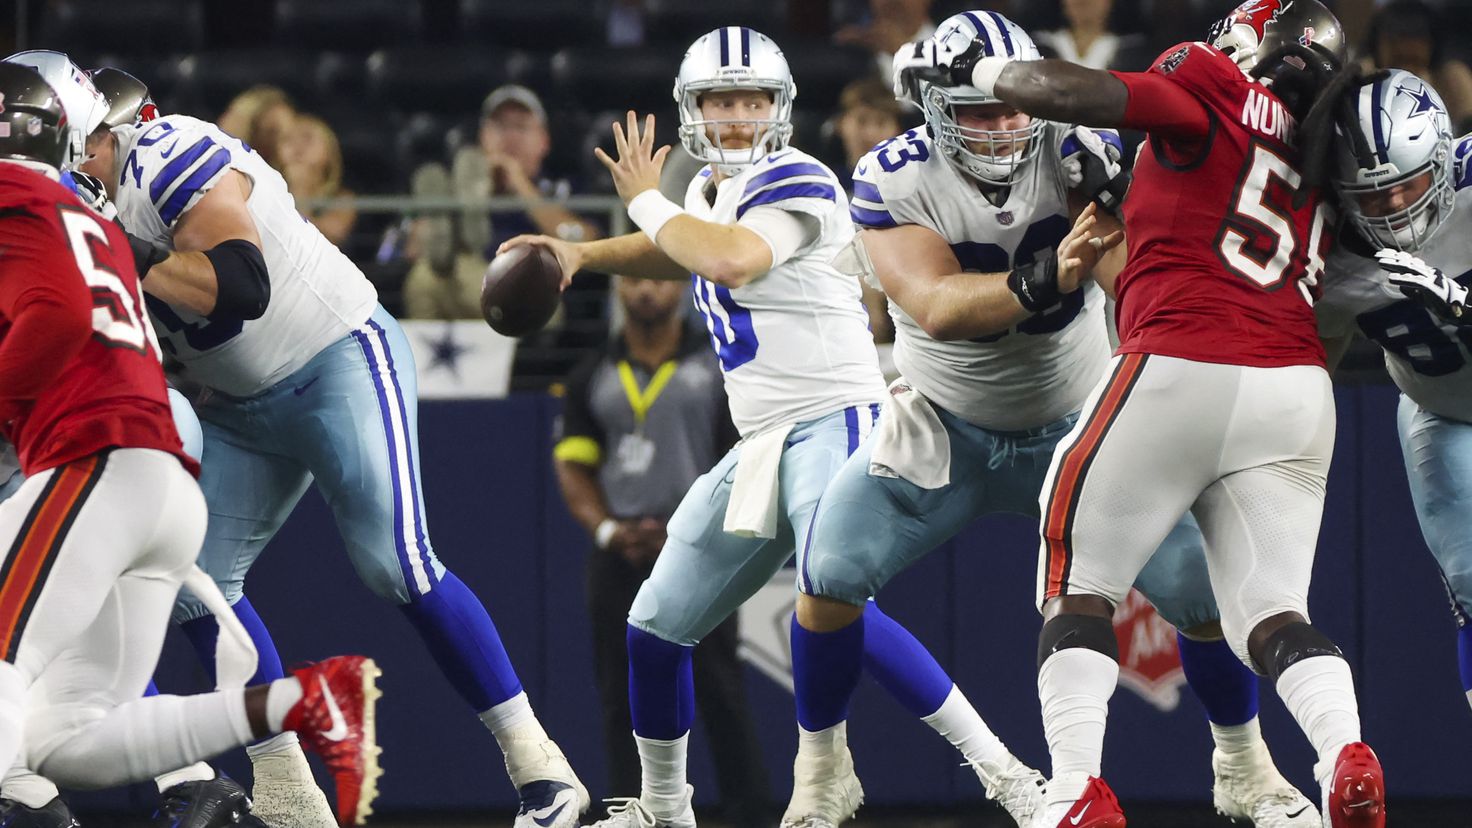 Prescott out 'several weeks' with hand surgery after Cowboys' loss to Bucs, NFL